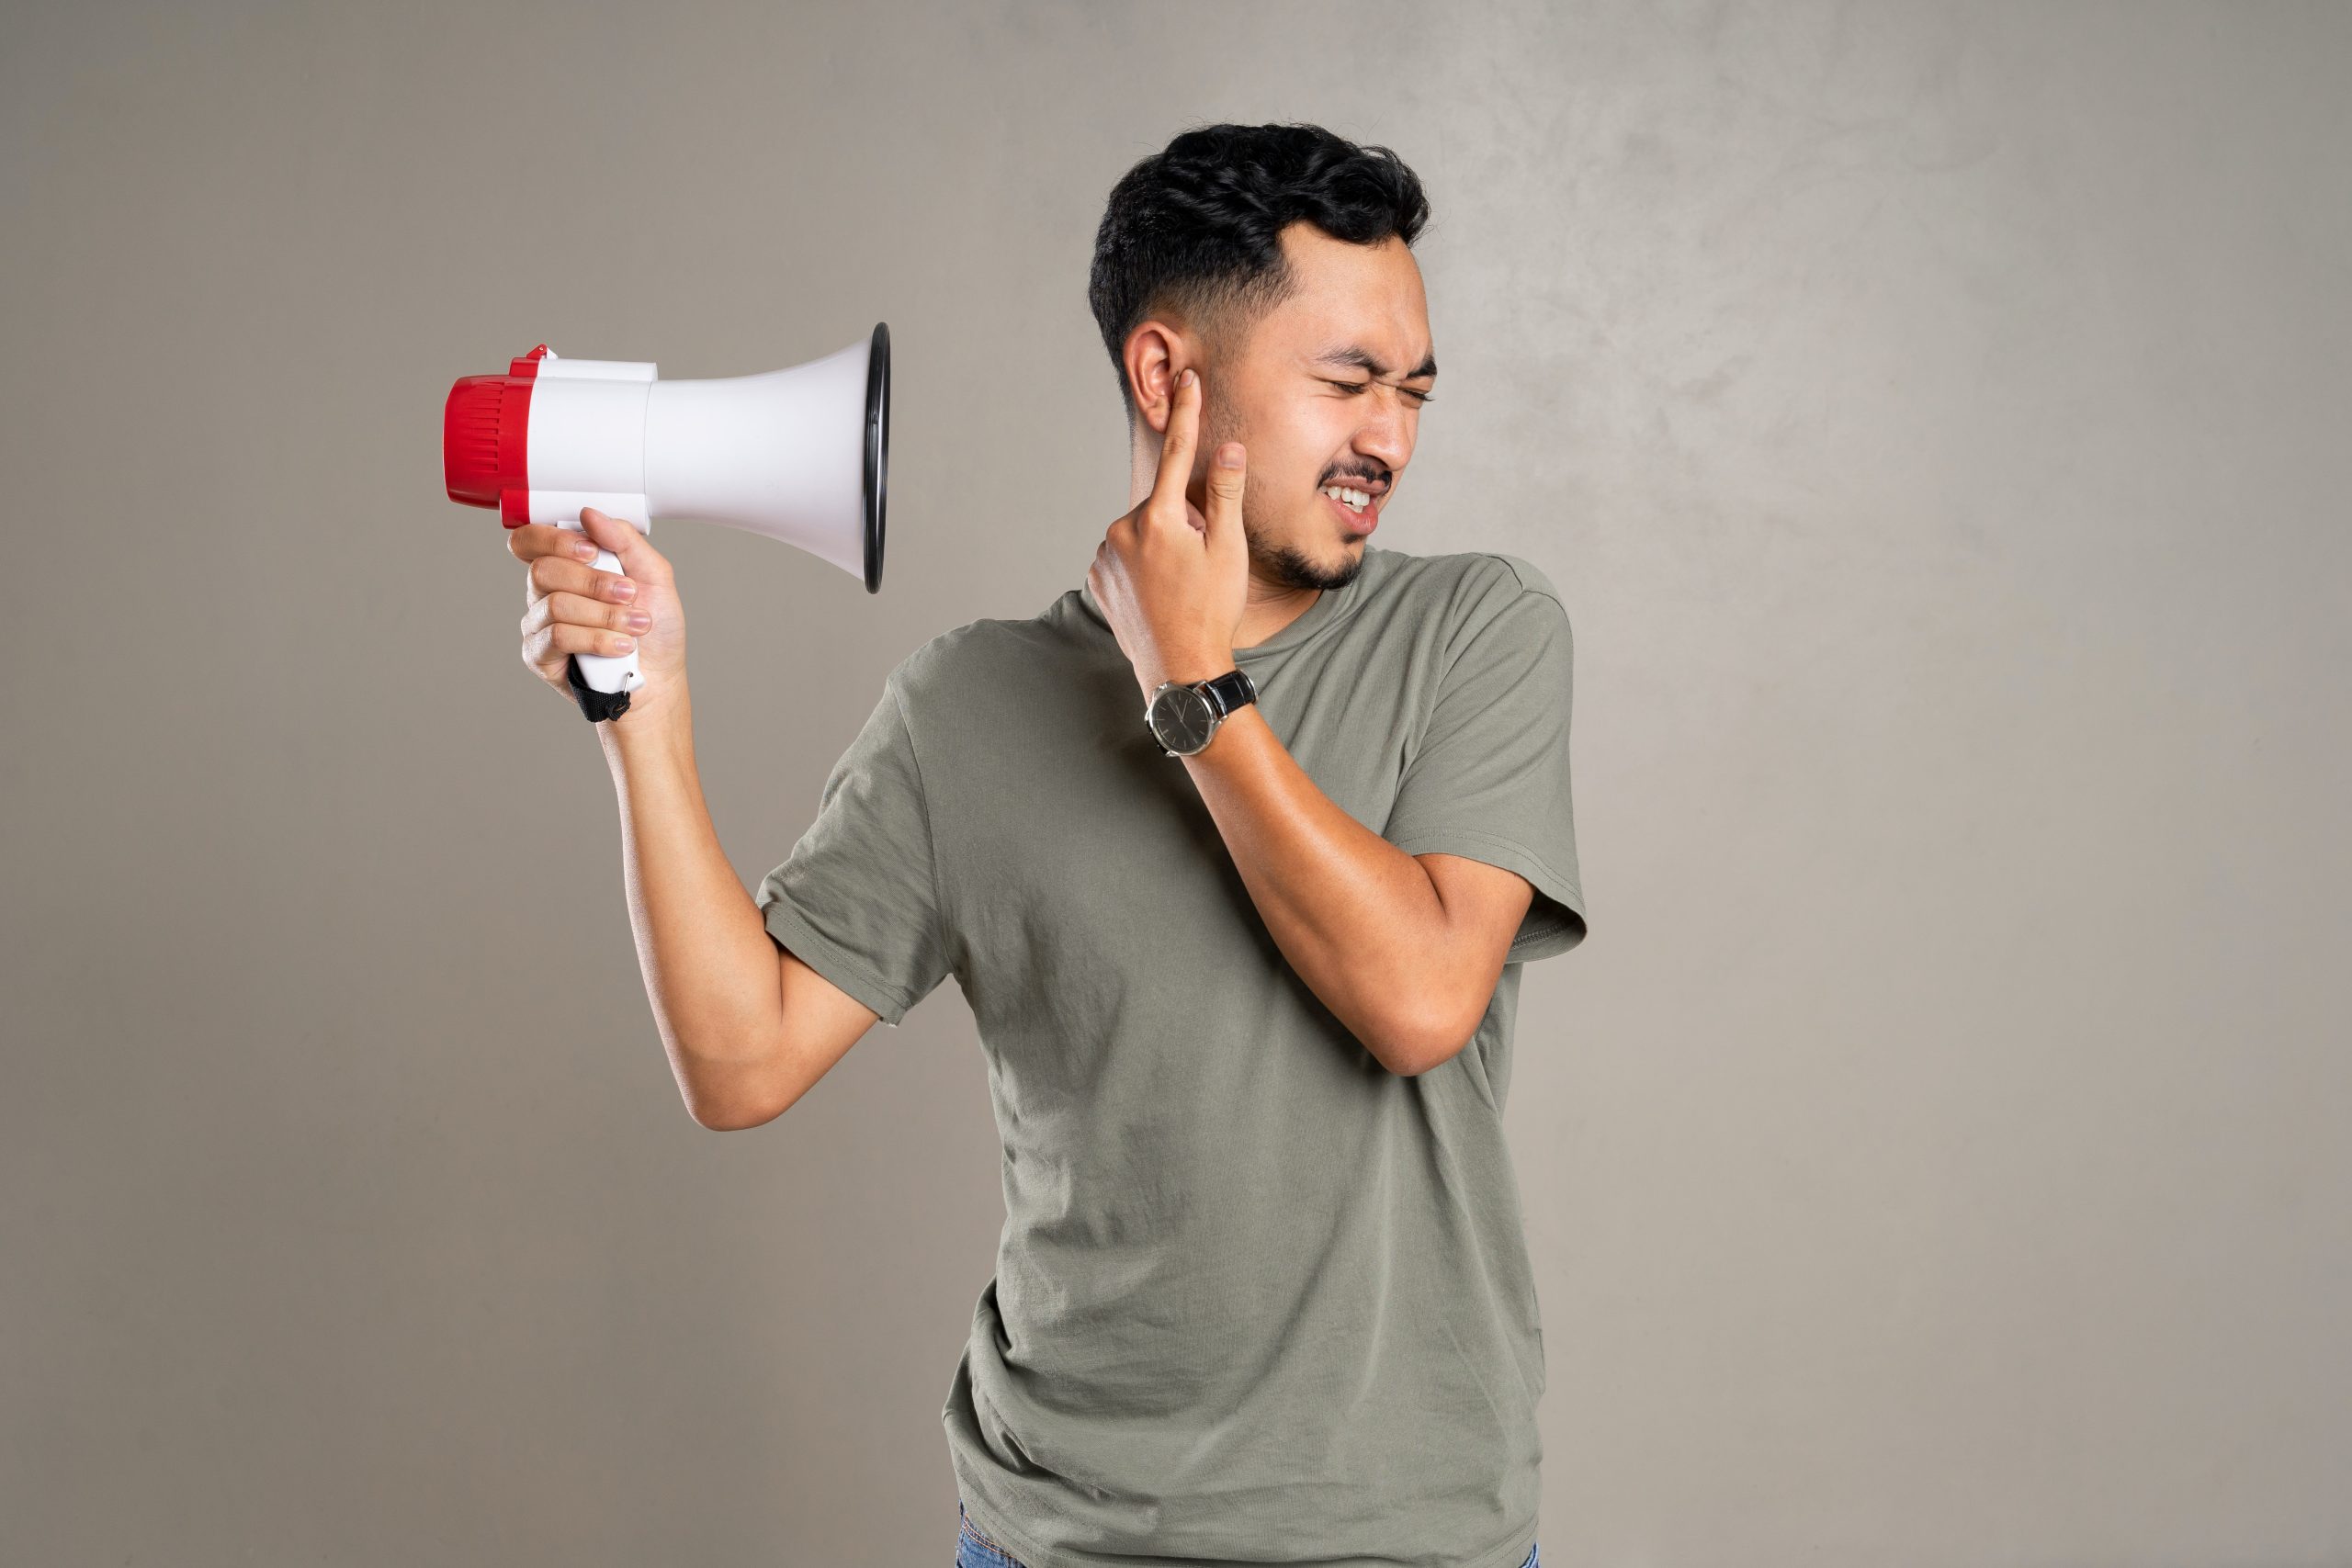 A man holds megaphone close to his head while also holding a finger over his hear to indicate the megaphone is loud.